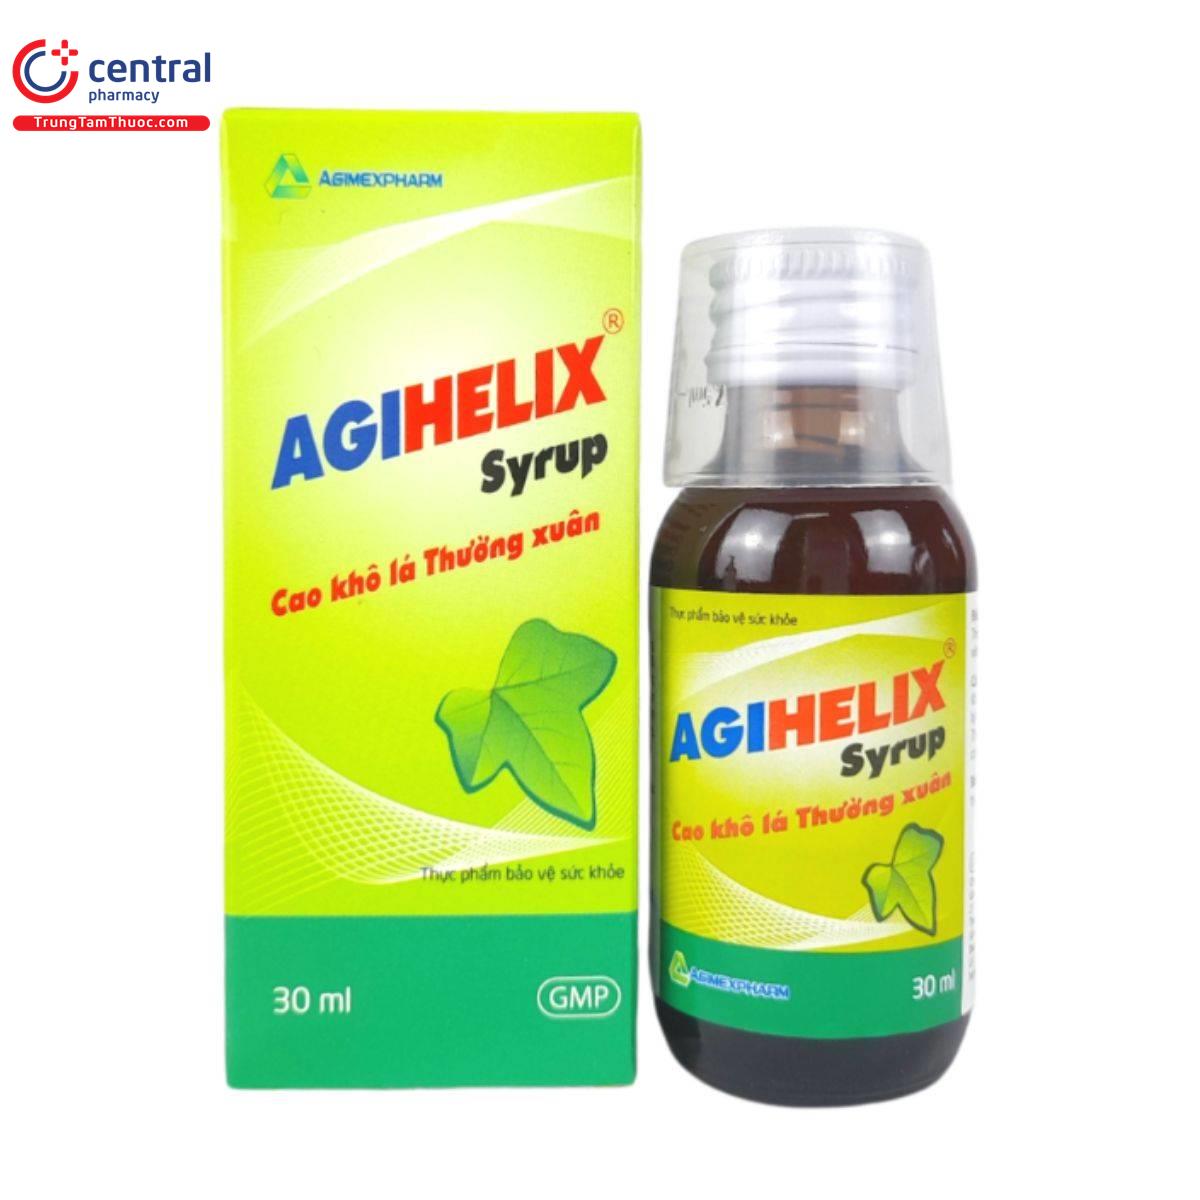 agihelix syrup 1 1 B0537